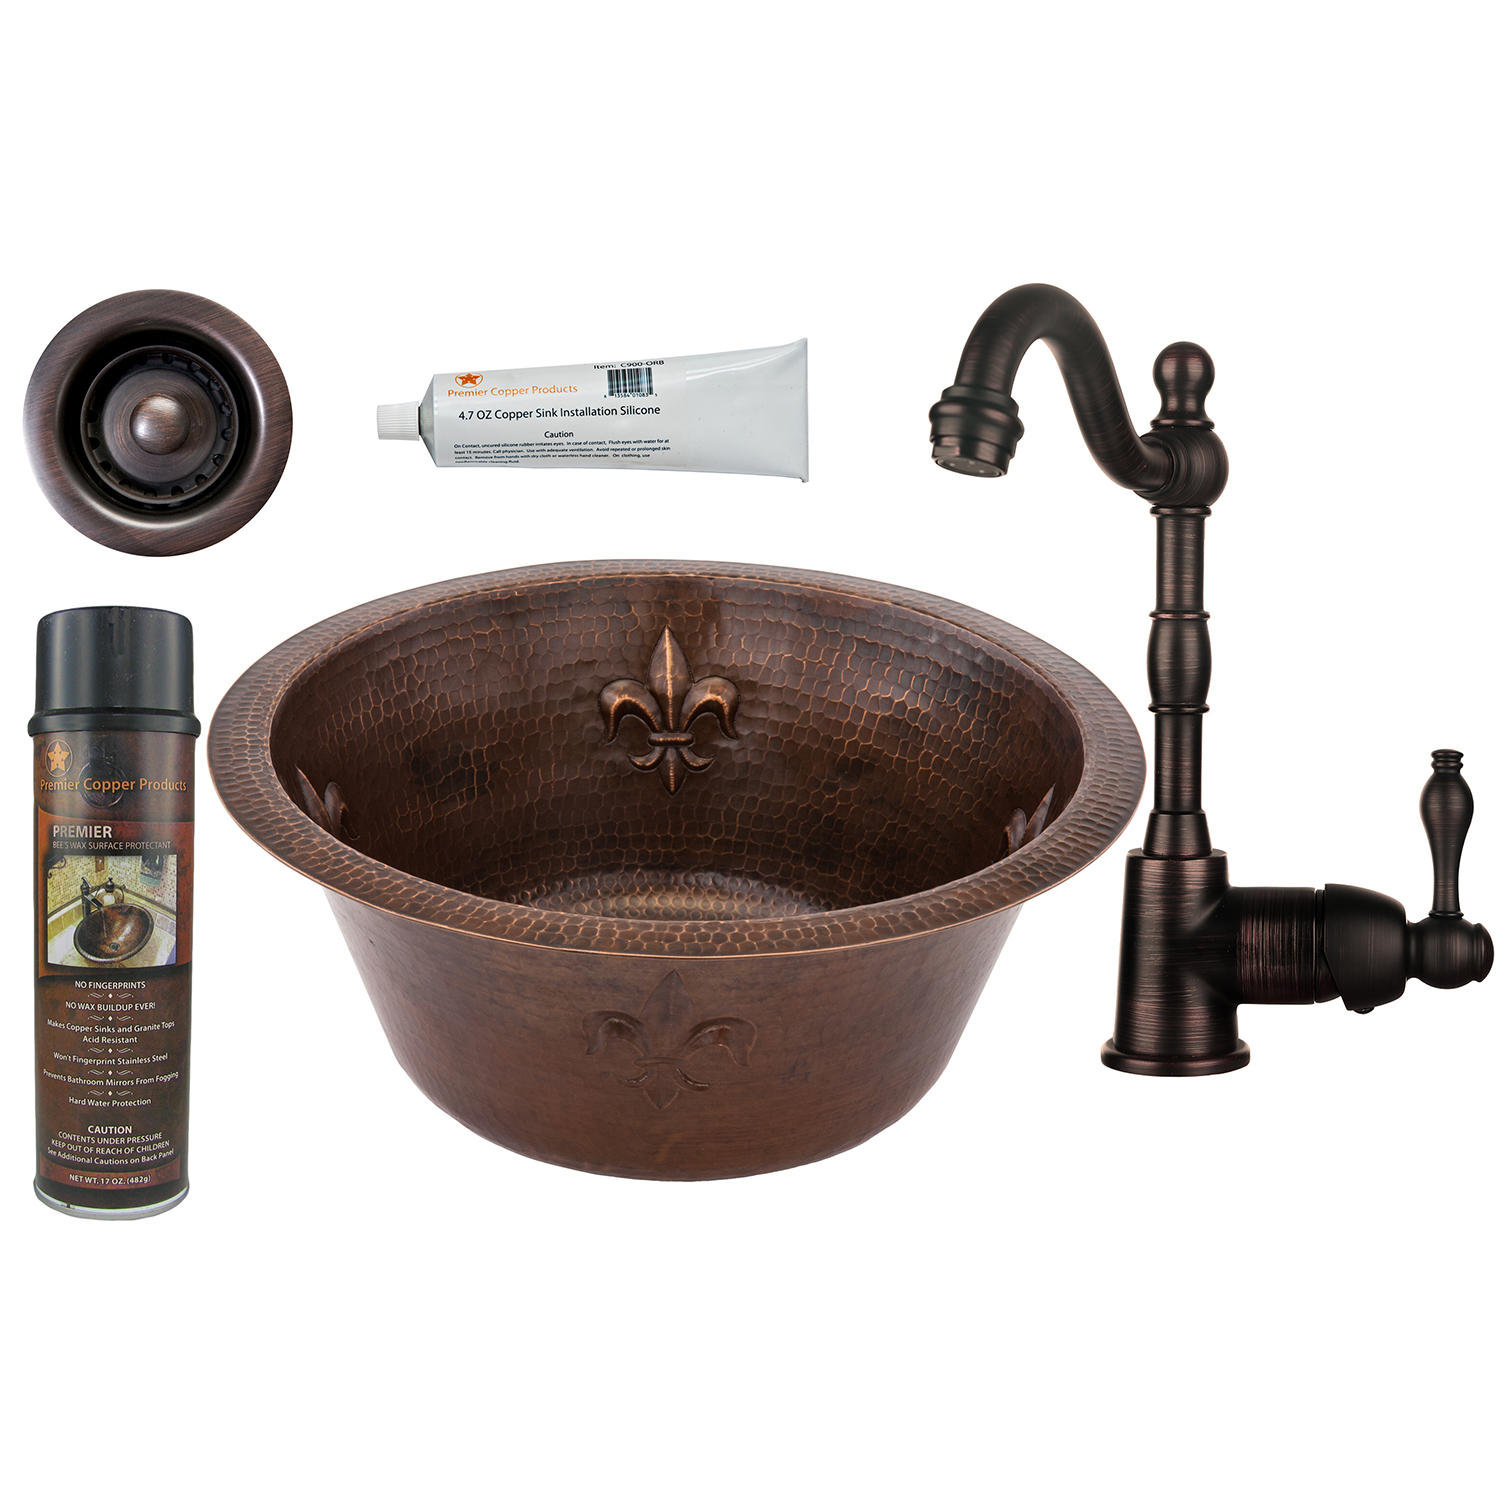 16 Inch Round Copper Fleur De Lis Bar Sink With 2 Inch Drain Size, Faucet And Accessories Package, Oil Rubbed Bronze